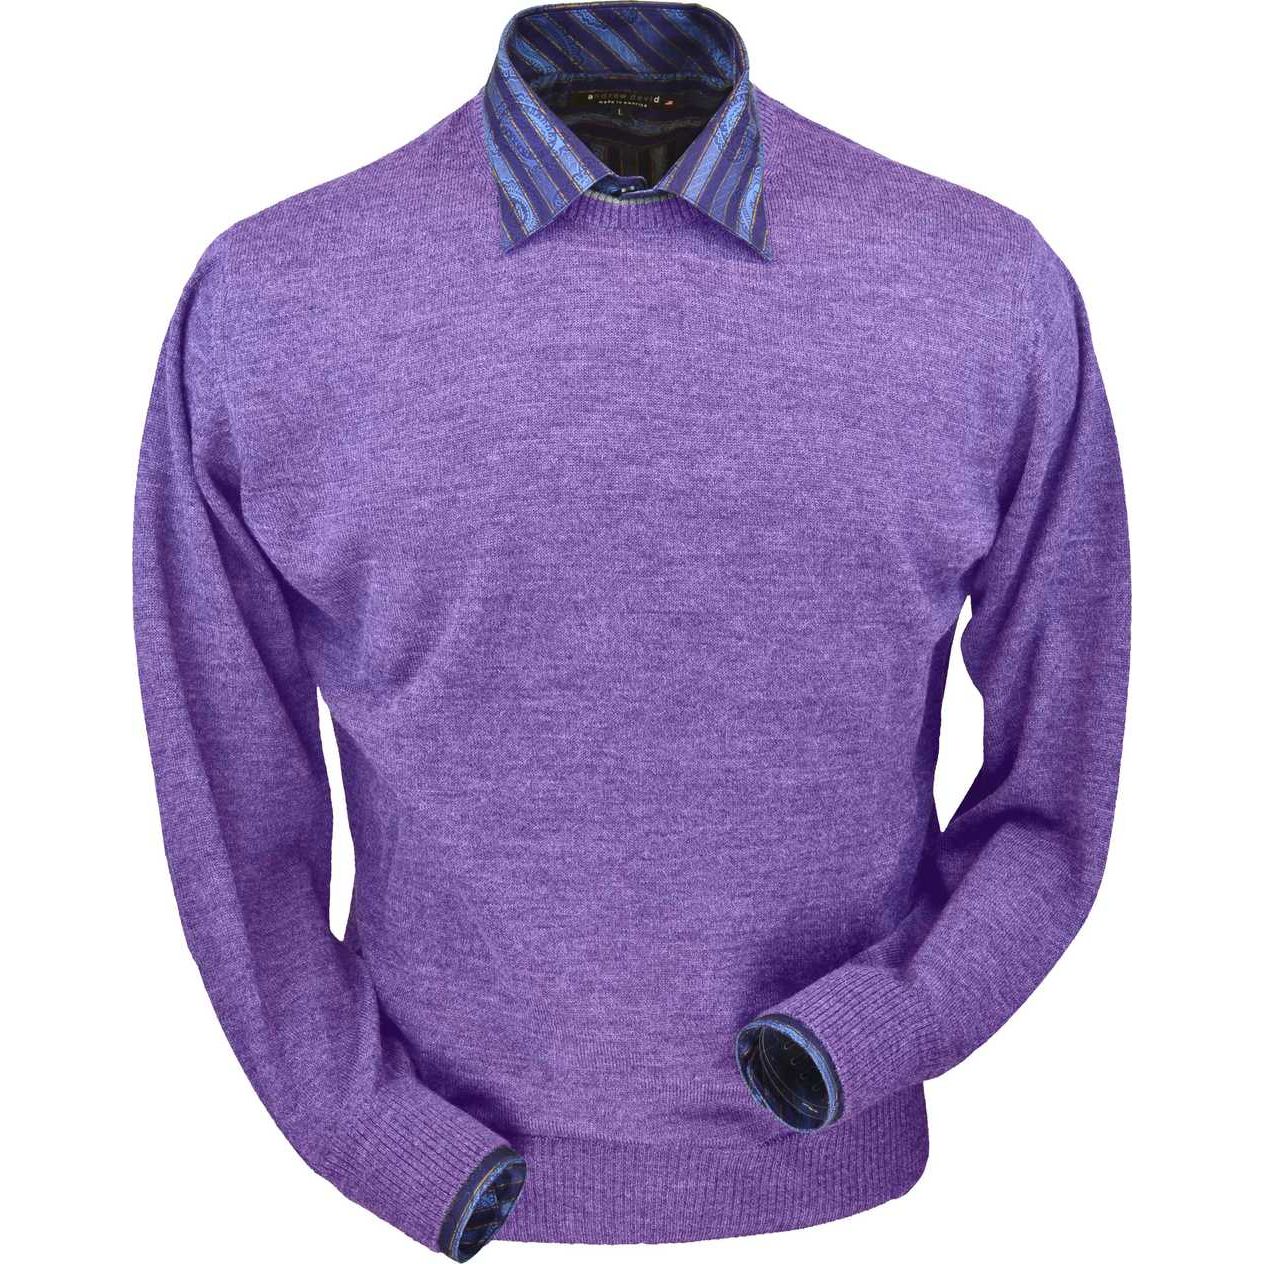 Royal Alpaca Crew Neck Sweater in Lilac Heather by Peru Unlimited